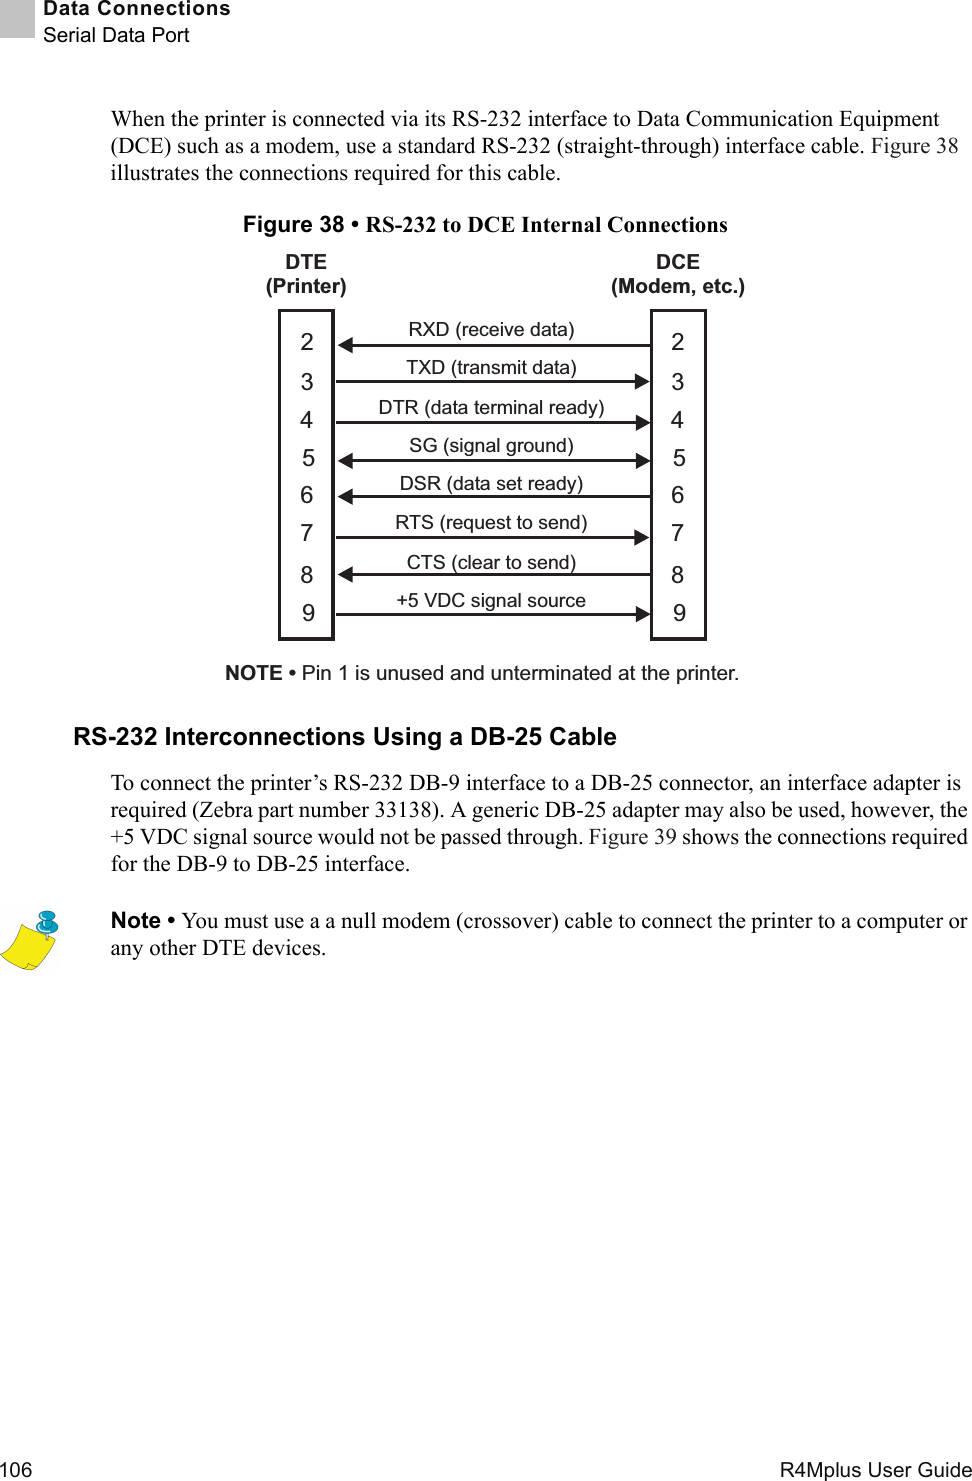 106   R4Mplus User GuideData ConnectionsSerial Data PortWhen the printer is connected via its RS-232 interface to Data Communication Equipment (DCE) such as a modem, use a standard RS-232 (straight-through) interface cable. Figure 38 illustrates the connections required for this cable.Figure 38 • RS-232 to DCE Internal ConnectionsRS-232 Interconnections Using a DB-25 CableTo connect the printer’s RS-232 DB-9 interface to a DB-25 connector, an interface adapter is required (Zebra part number 33138). A generic DB-25 adapter may also be used, however, the +5 VDC signal source would not be passed through. Figure 39 shows the connections required for the DB-9 to DB-25 interface. Note • You must use a a null modem (crossover) cable to connect the printer to a computer or any other DTE devices.DTE(Printer)DCE(Modem, etc.)RXD (receive data)TXD (transmit data)DTR (data terminal ready)SG (signal ground)DSR (data set ready)RTS (request to send)CTS (clear to send)+5 VDC signal sourceNOTE • Pin 1 is unused and unterminated at the printer.2345678923456789